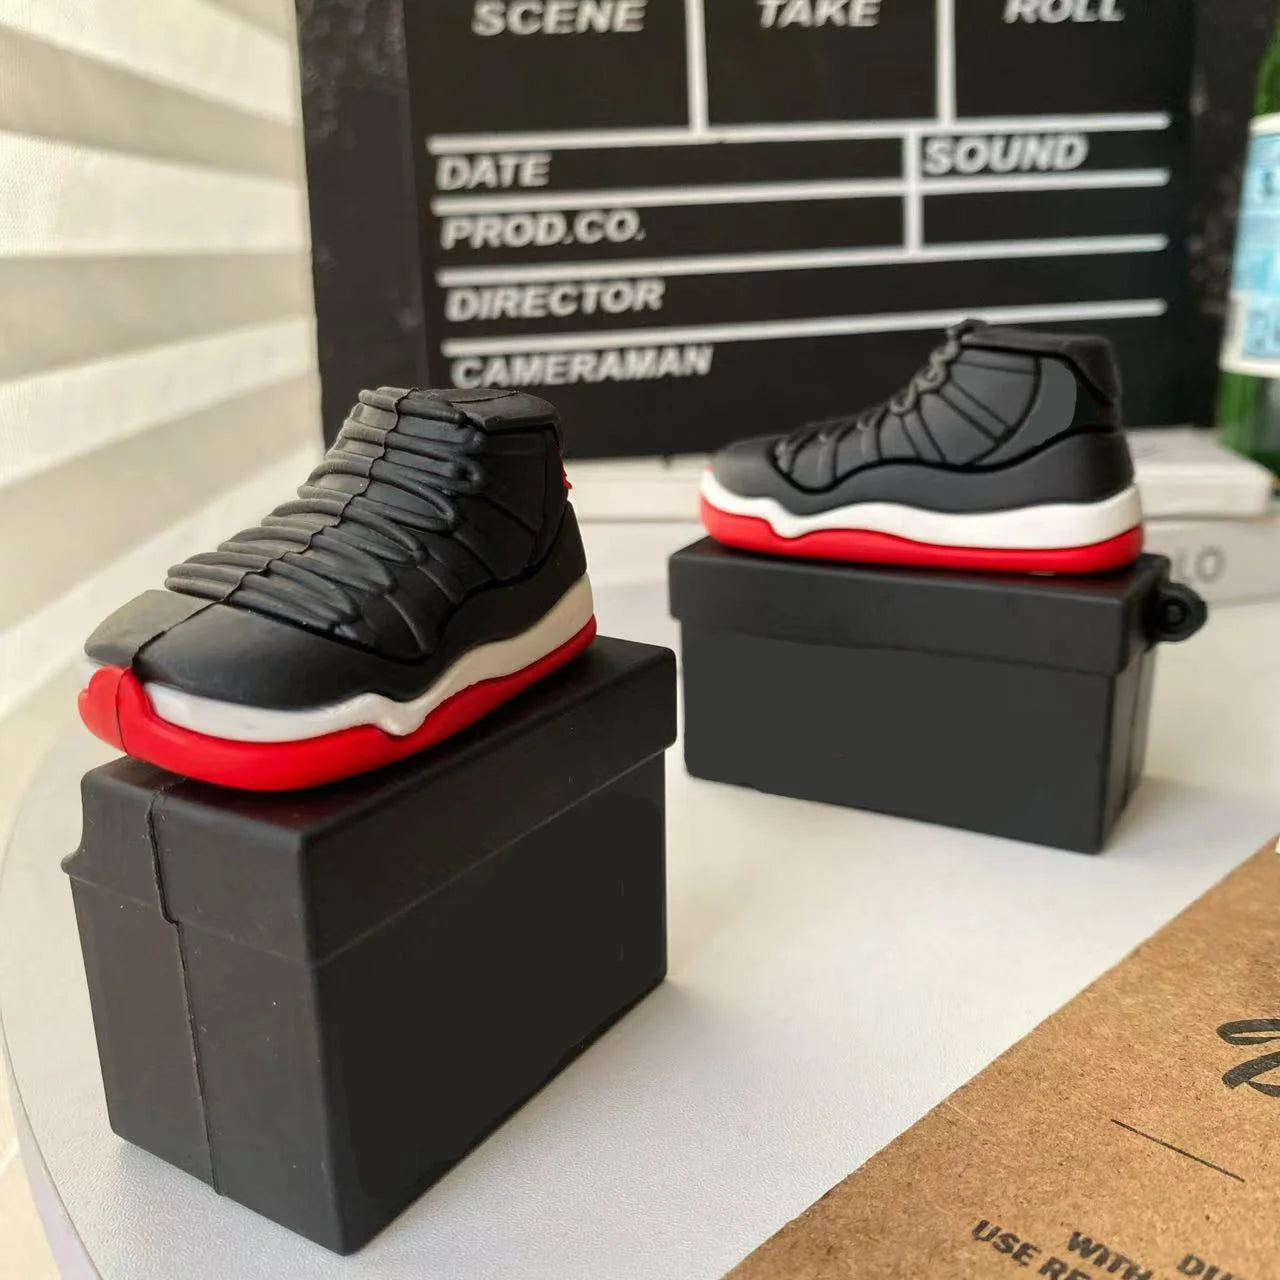 Luxury Sports Basketball Shoes Sneakers Earphone Case: Protect your Apple Airpods in style!